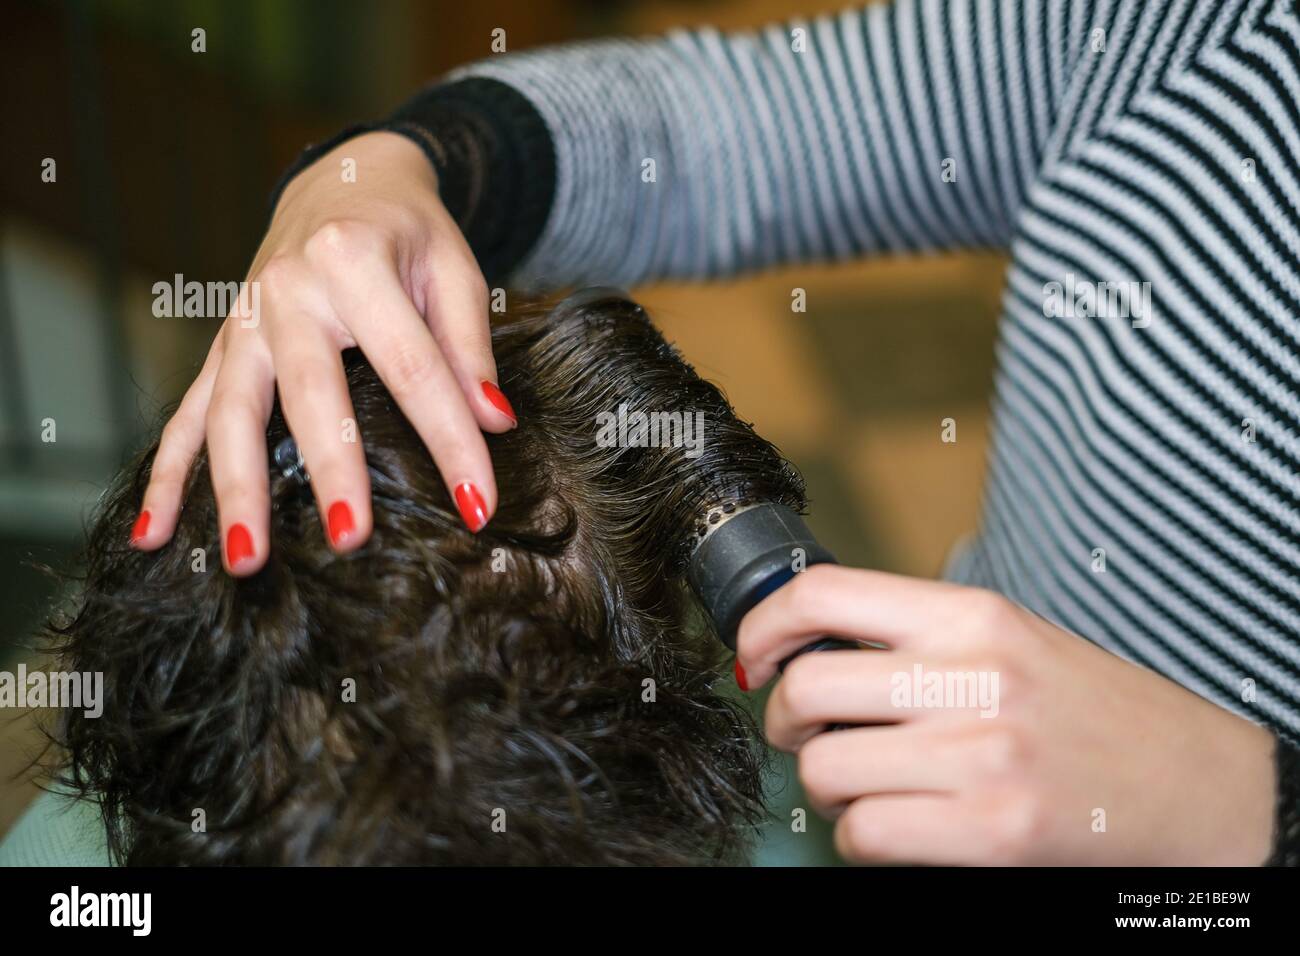 Hair dresser Woman while hair drying customer at work,home beauty treatment Stock Photo